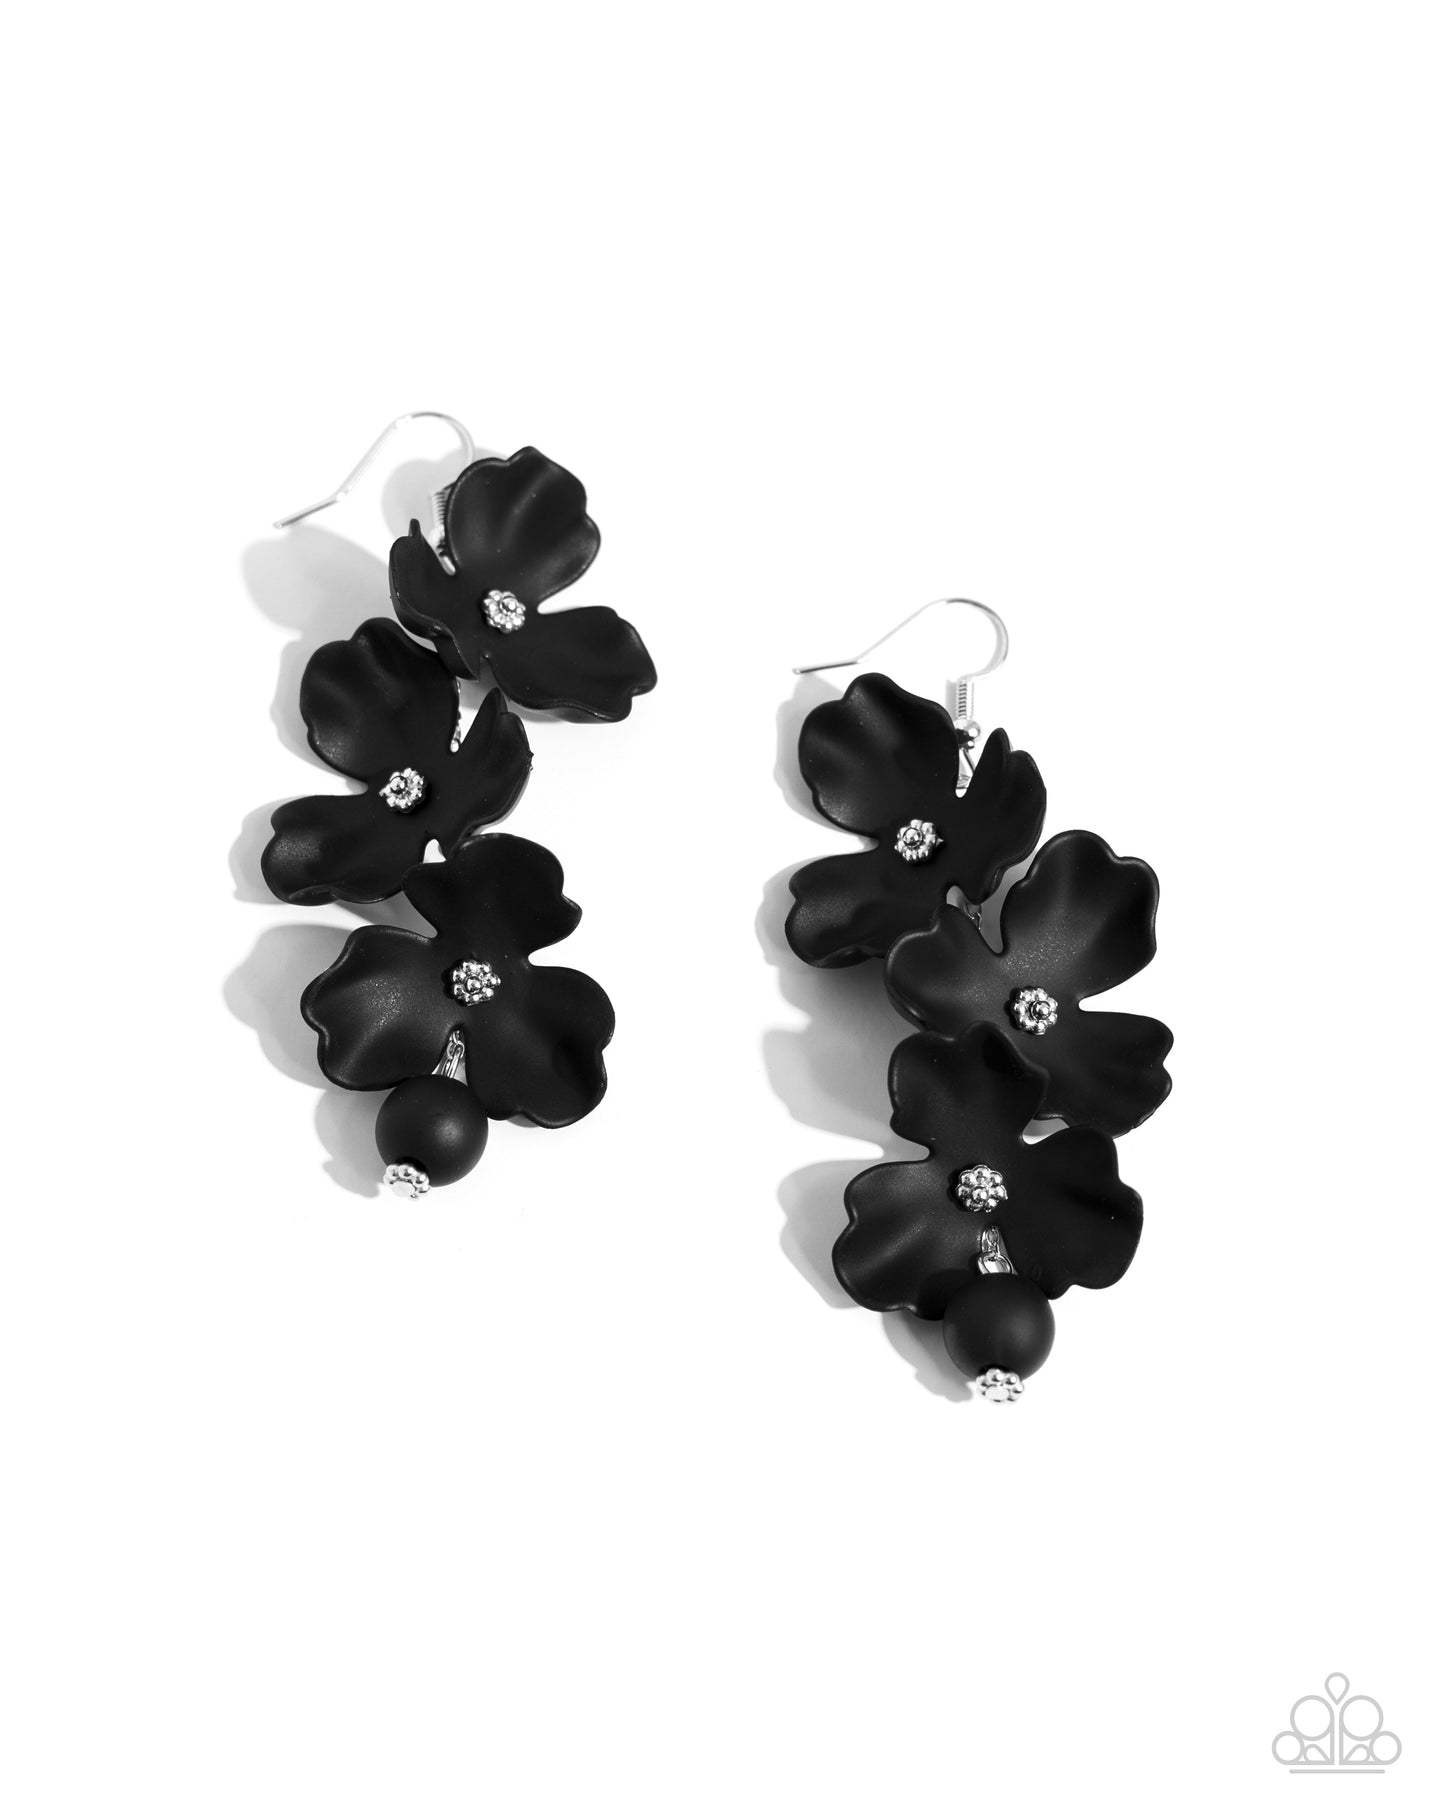 Paparazzi Accessories - Plentiful Petals - Black Earrings a&nbsp;dainty silver chain gives way to a trio of black acrylic flowers that slide along the chain and an exaggeratedly large bead in the same hue. The flowers curl up around a dainty floral silver-beaded center while the solitaire bead features the same eye-catching center for a whimsical finish. Earring attaches to a standard fishhook fitting.  Sold as one pair of earrings.